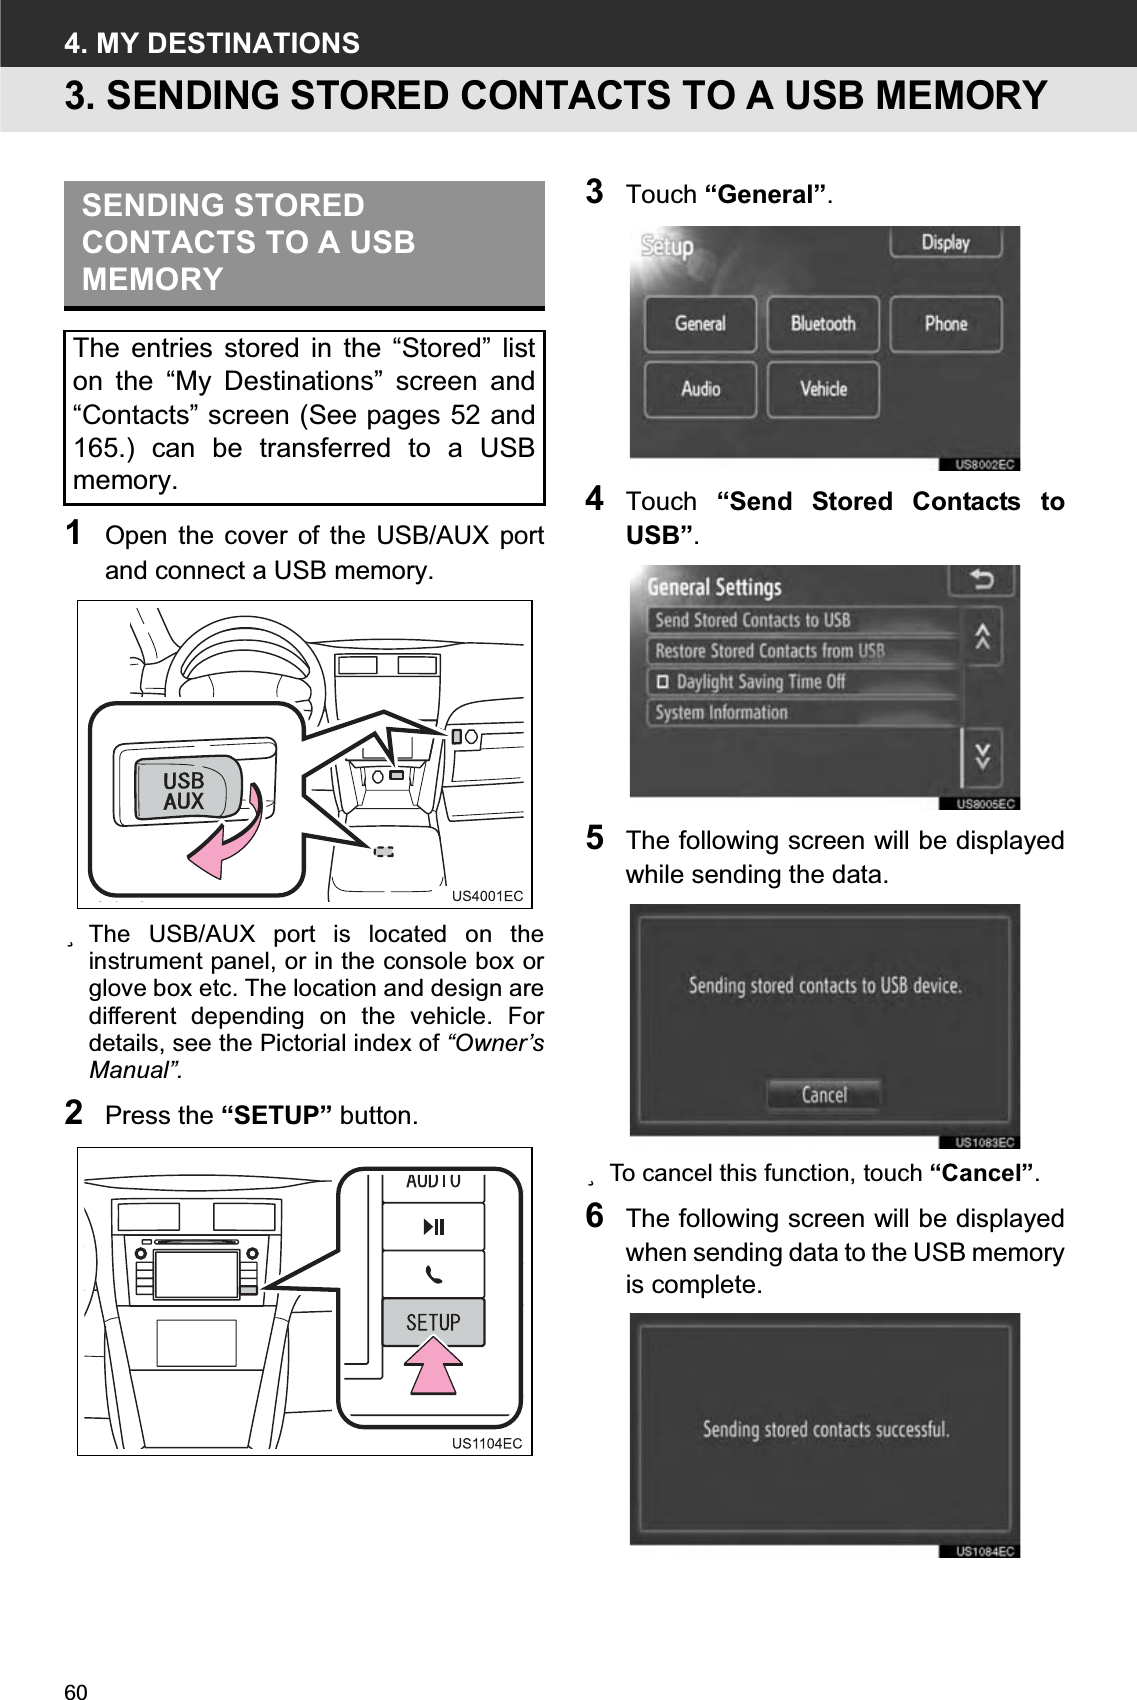 604. MY DESTINATIONS3. SENDING STORED CONTACTS TO A USB MEMORY1Open the cover of the USB/AUX portand connect a USB memory.zThe USB/AUX port is located on theinstrument panel, or in the console box orglove box etc. The location and design aredifferent depending on the vehicle. Fordetails, see the Pictorial index of “Owner’sManual”.2Press the “SETUP” button.3Touch “General”.4Touch  “Send Stored Contacts toUSB”.5The following screen will be displayedwhile sending the data.zTo cancel this function, touch “Cancel”.6The following screen will be displayedwhen sending data to the USB memoryis complete.SENDING STORED CONTACTS TO A USB MEMORYThe entries stored in the “Stored” liston the “My Destinations” screen and“Contacts” screen (See pages 52 and165.) can be transferred to a USBmemory.